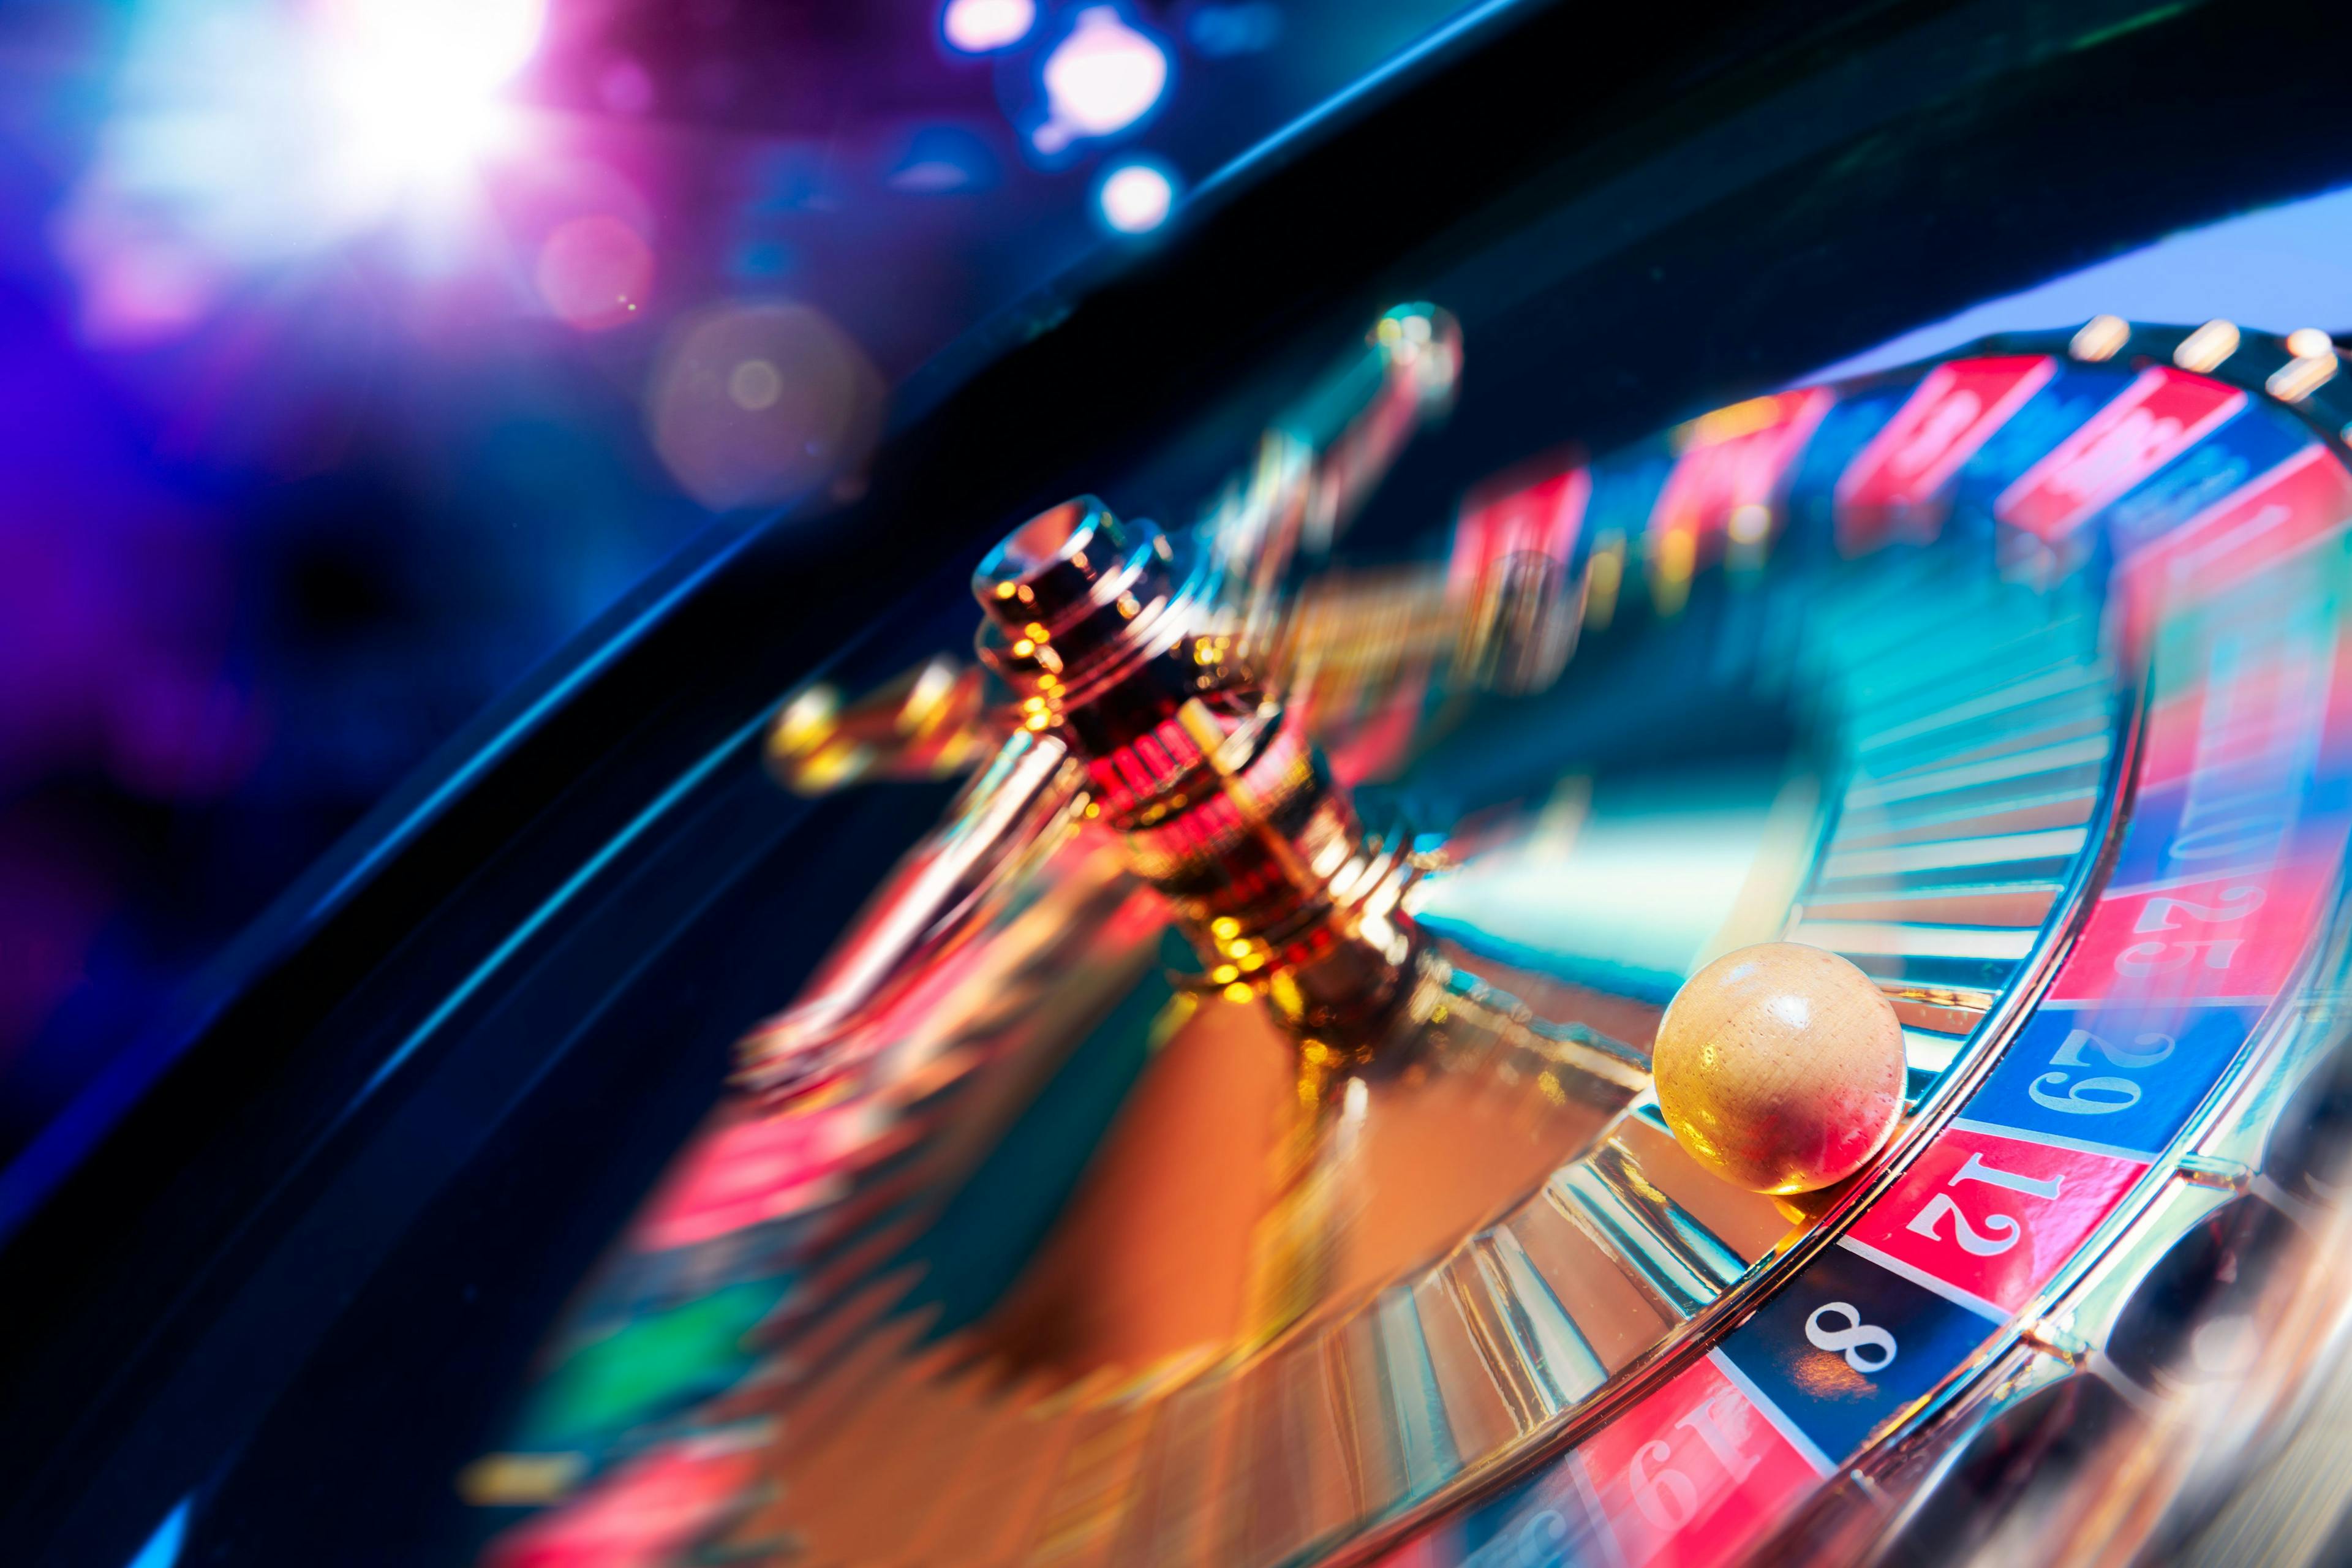 Roulette wheel in motion with a bright and colorful background | Image credit: fergregory -  © stock.adobe.com